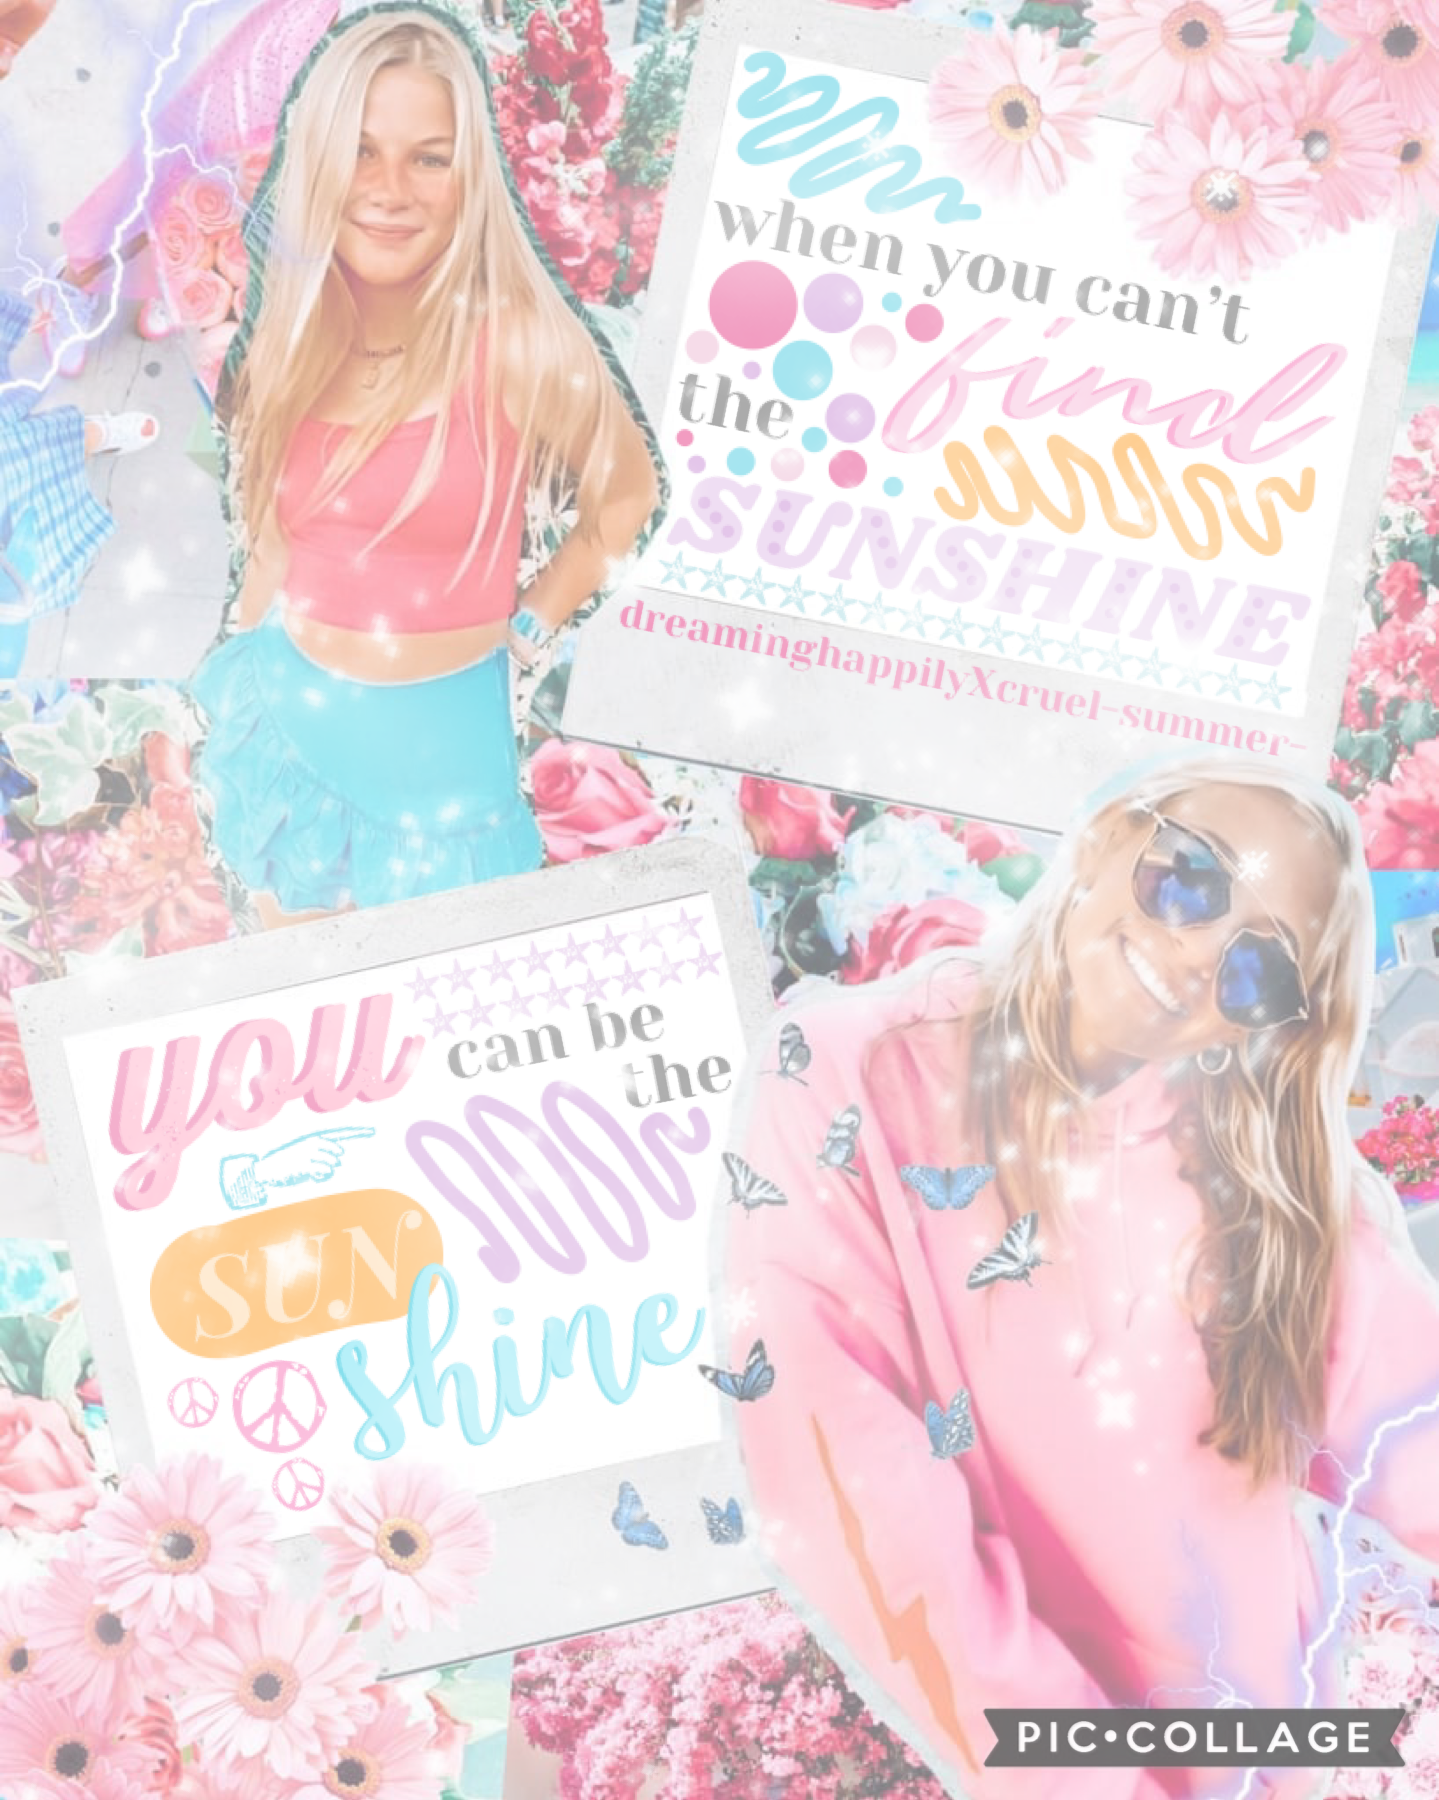 💅🏼COLLAB💅🏼tap…
collab with @dreaminghappily! omg she was a DREAM to work with it was so amazing!!! definitely recommend collabing with her sometime! she did the gorgeous bg and i did the text! go follow!

💕07/18/22💕